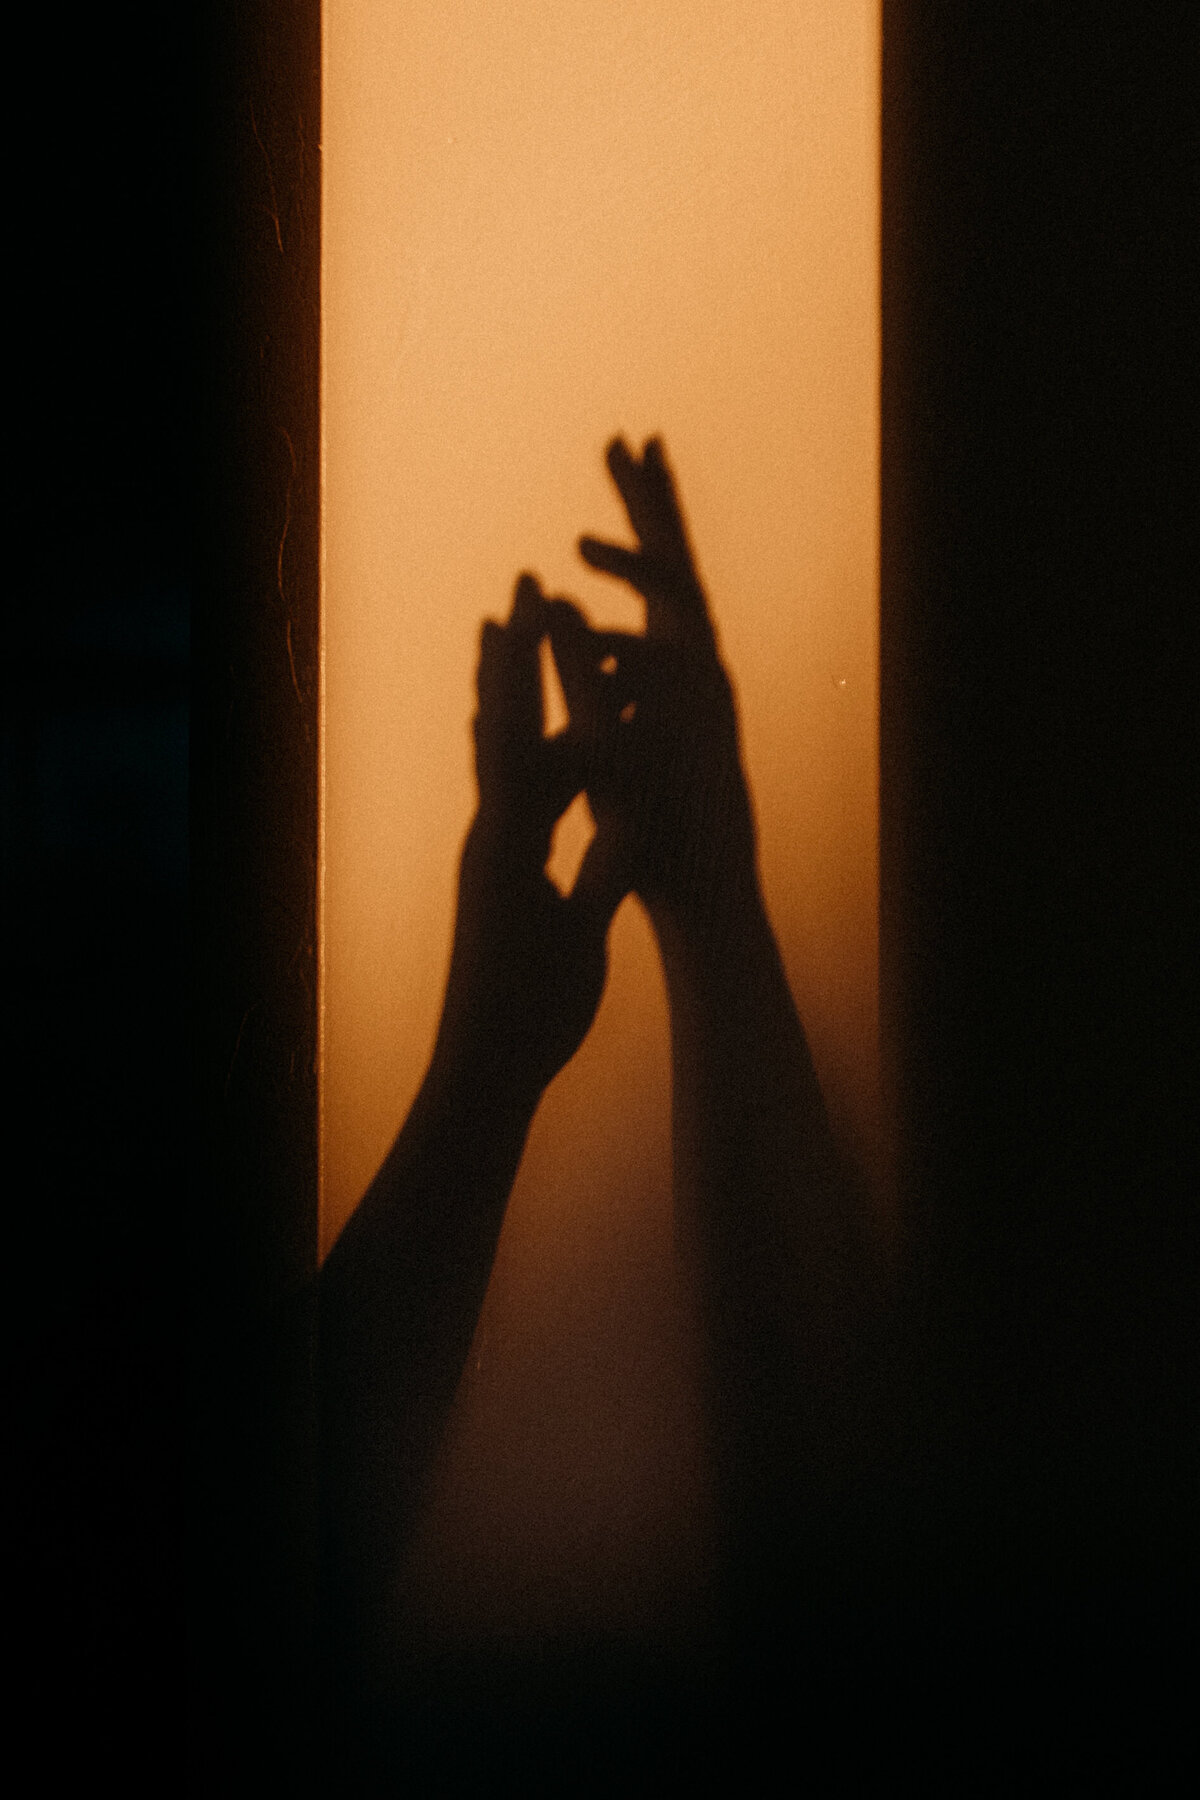 Silhouette of two hands touching